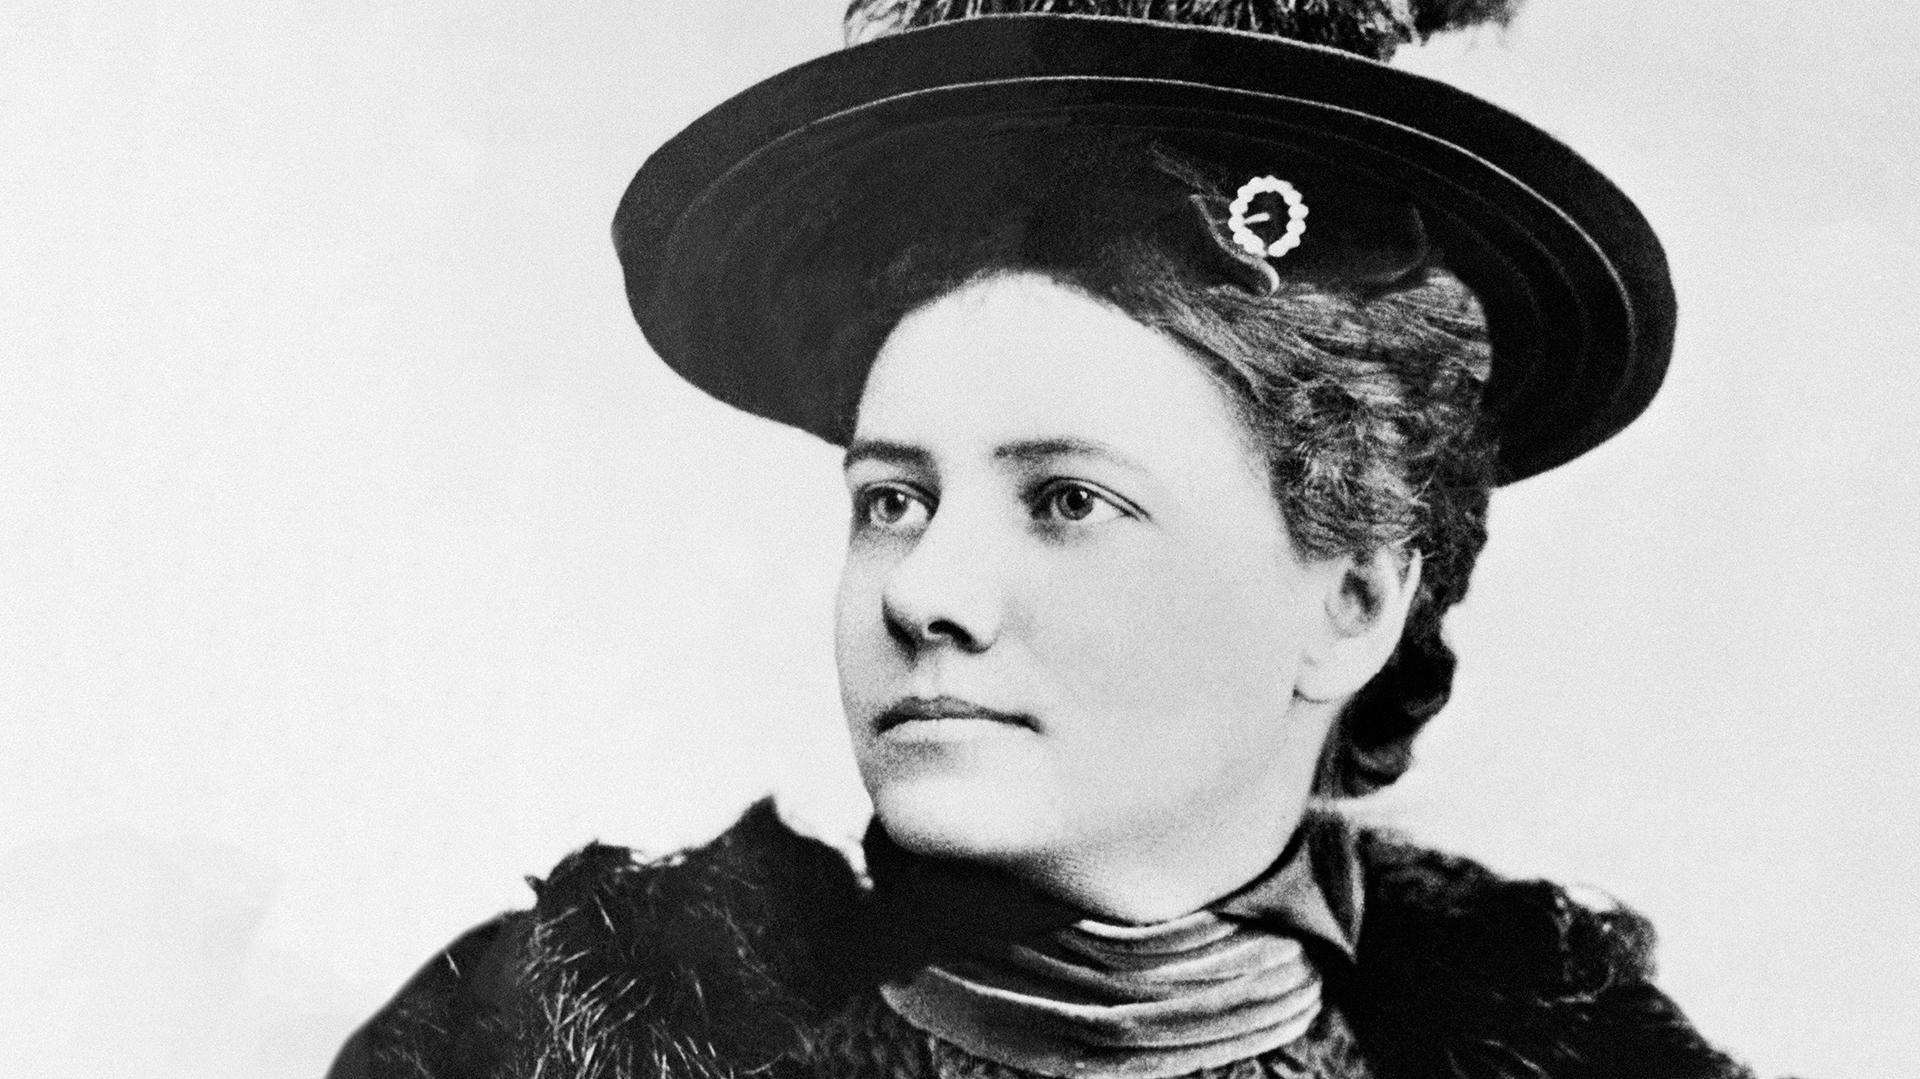 January Nellie Bly Pleted Her Record Breaking Trip